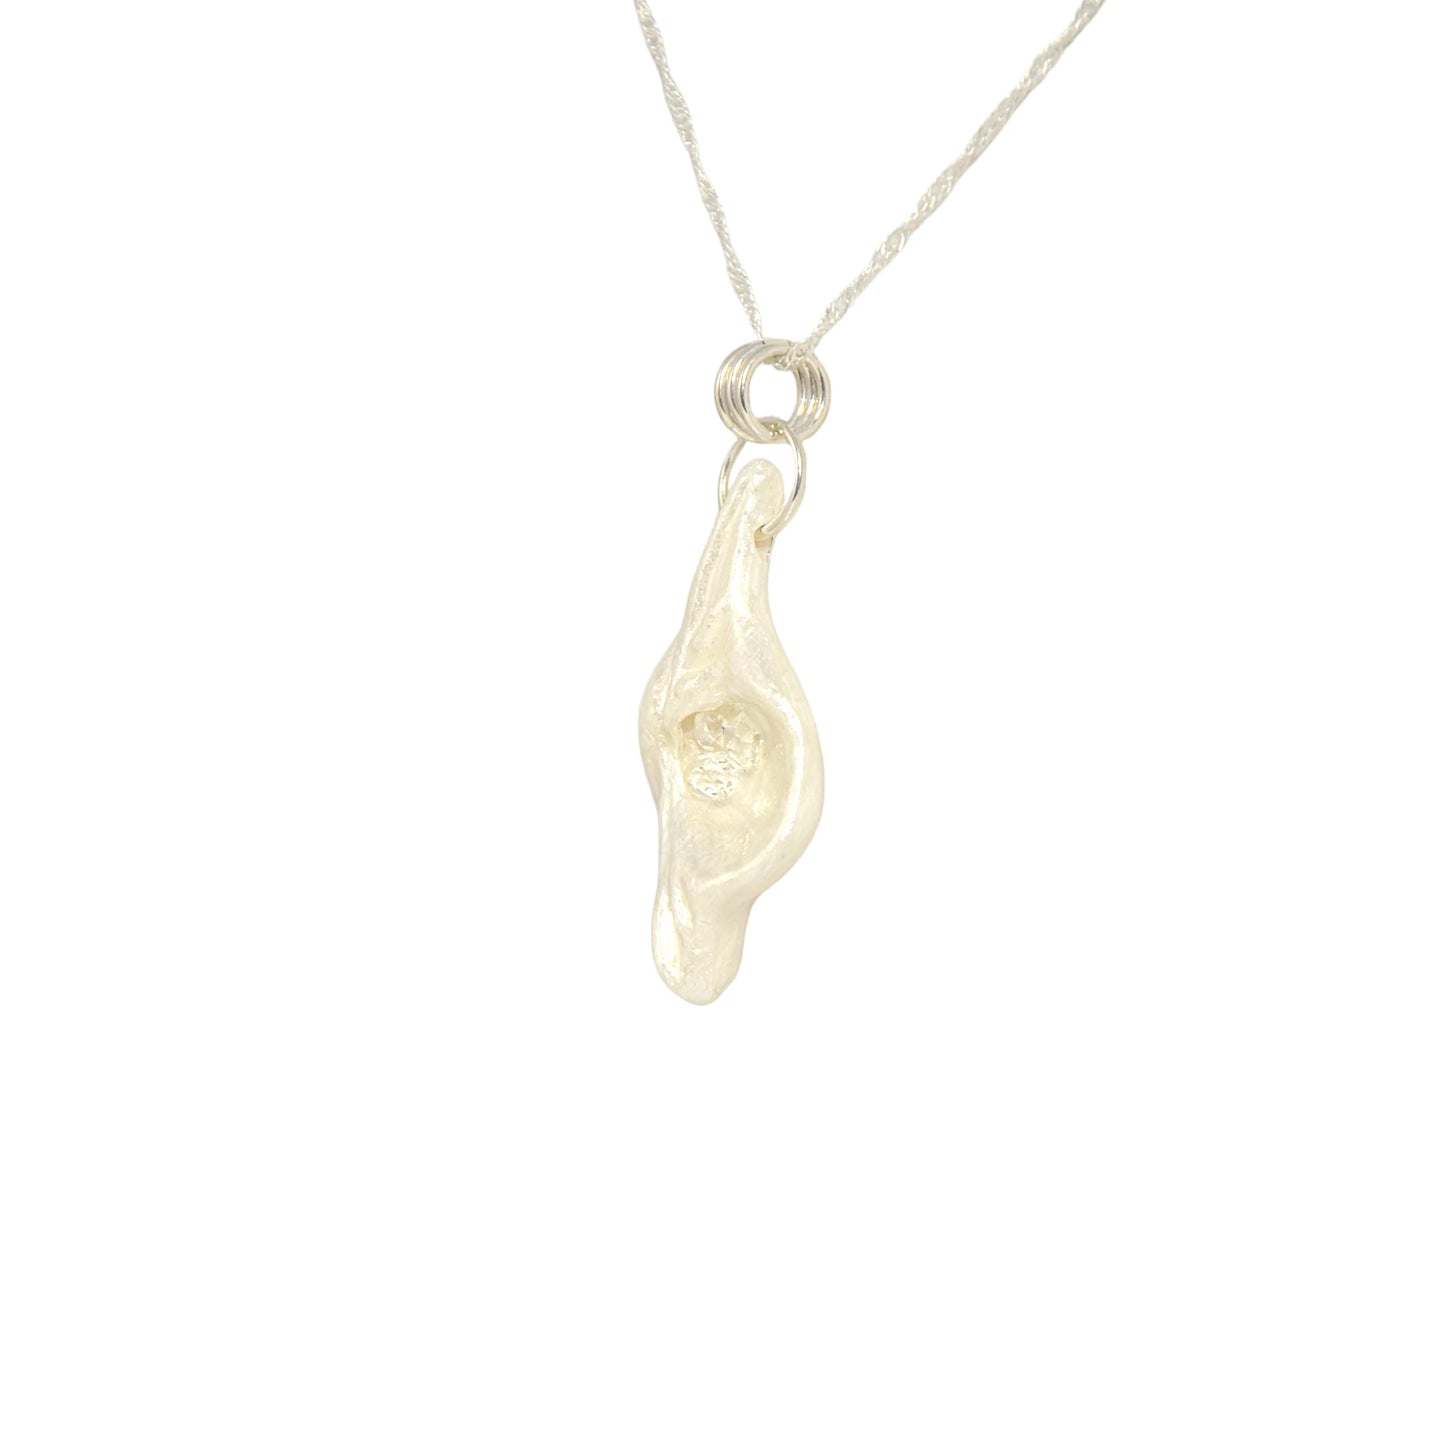 Halo natural seashell pendant with three herkimer diamonds. The pendant is turned so the viewer can see the right side of the pendant.